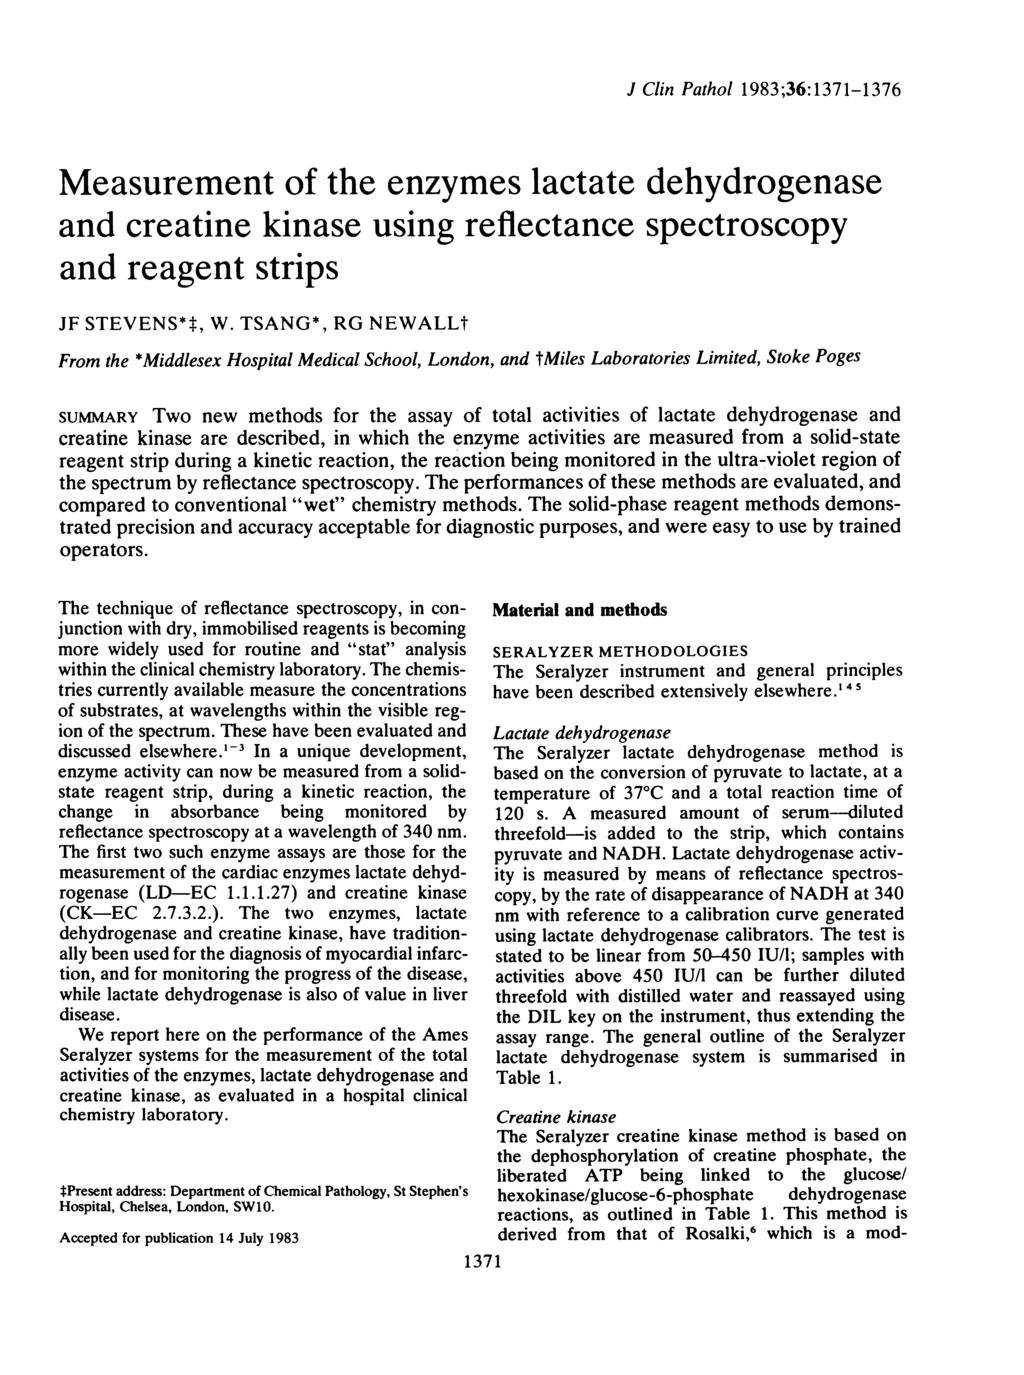 J Clin Pathol 1983;36:1371-1376 Measurement of the enzymes lactate dehydrogenase and creatine kinase using reflectance spectroscopy and reagent strips JF STEVENS*t, W.